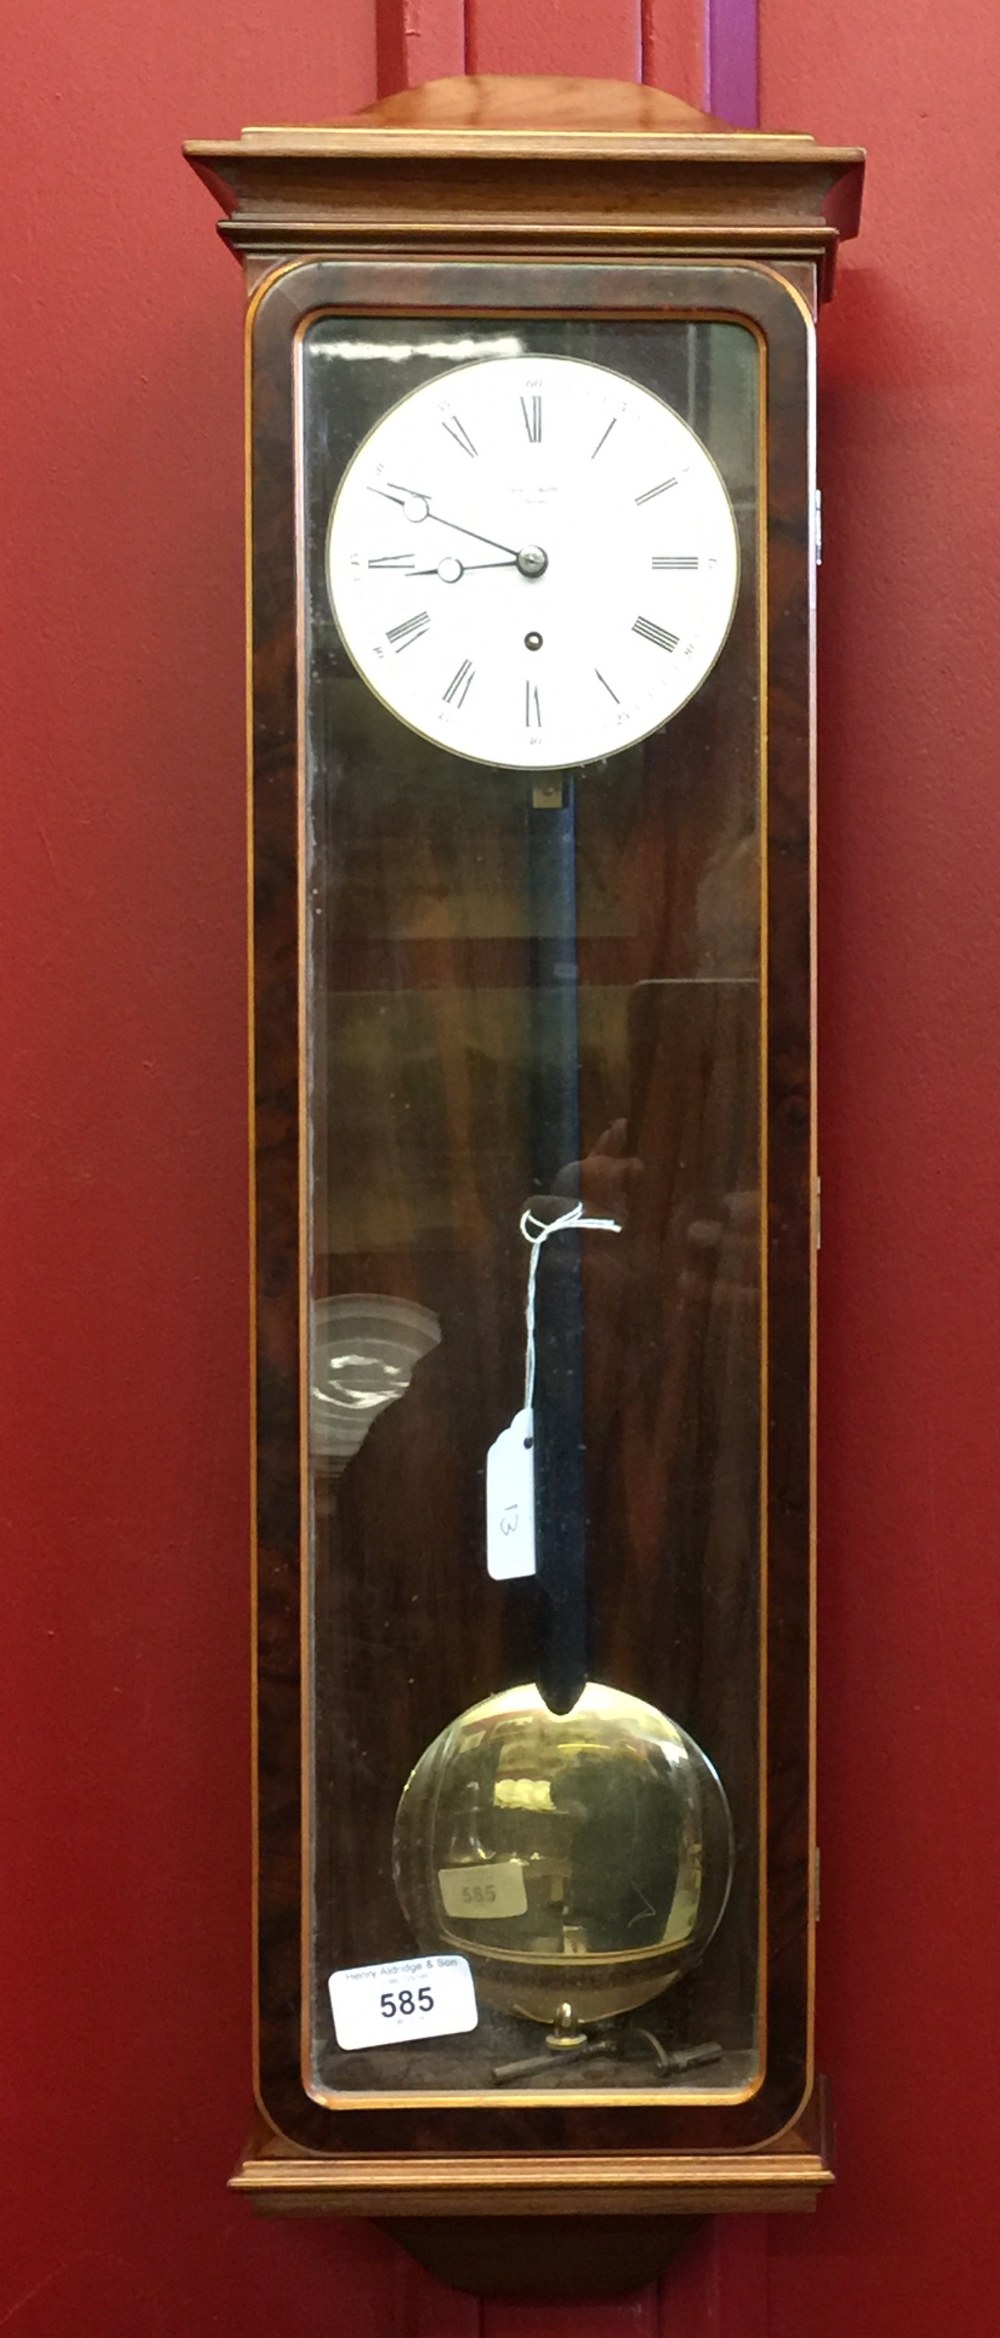 20th cent. Wall clock, mahogany and glass case. Erwin Sattler, Manchester. 6ins. x 24ins. x 3½ins.